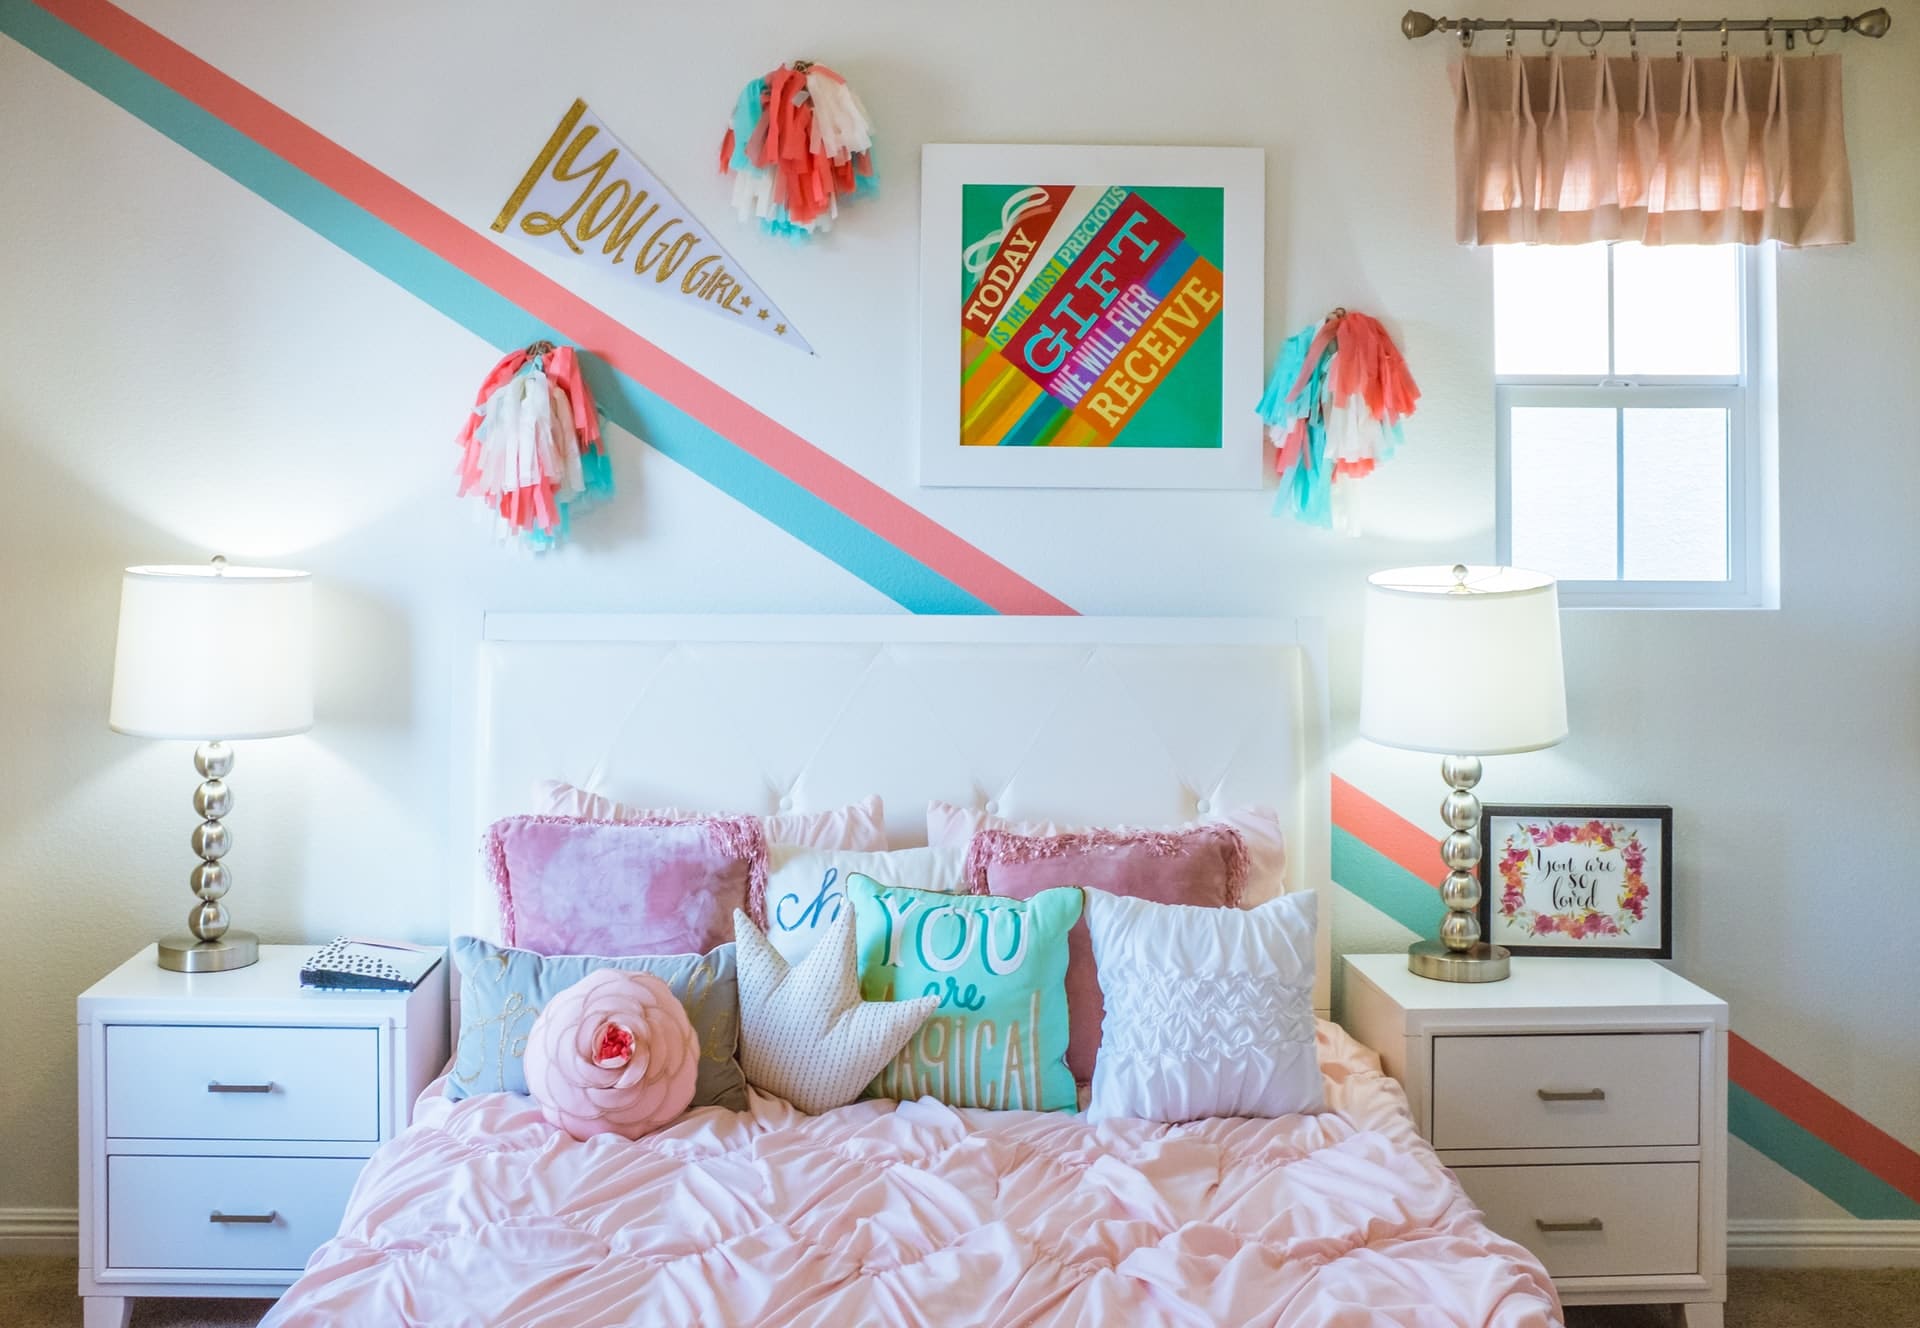 neonbrand b GtasP517U unsplash - How to Turn a Nursery into a Toddler Bedroom